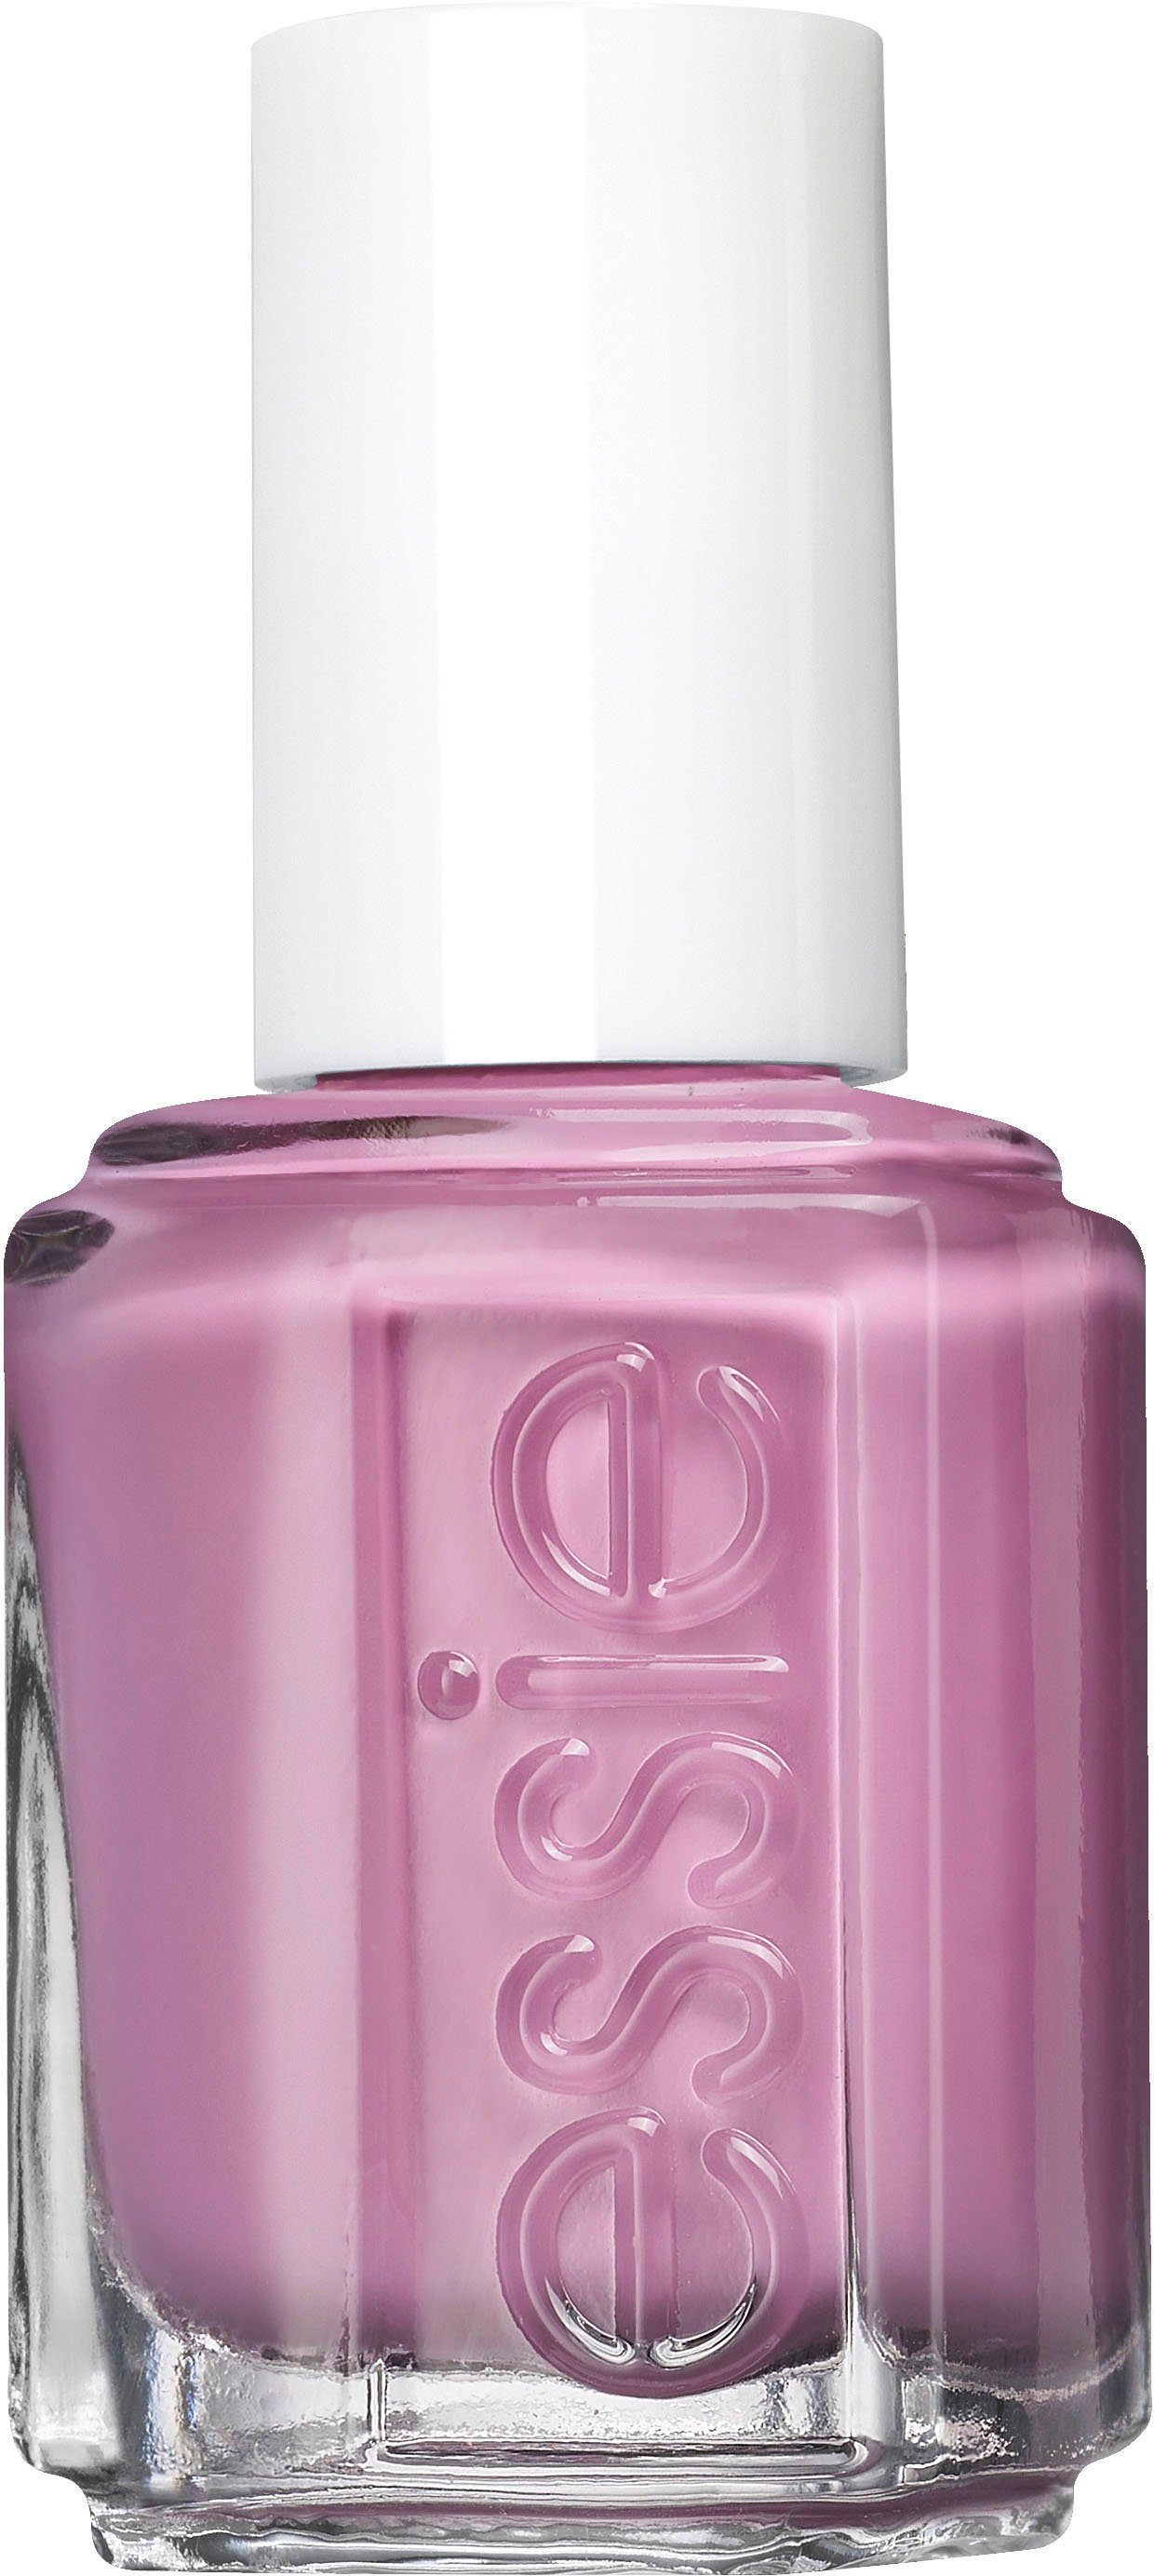 essie Nagellack Lilatöne Nr. swell you 718 suits